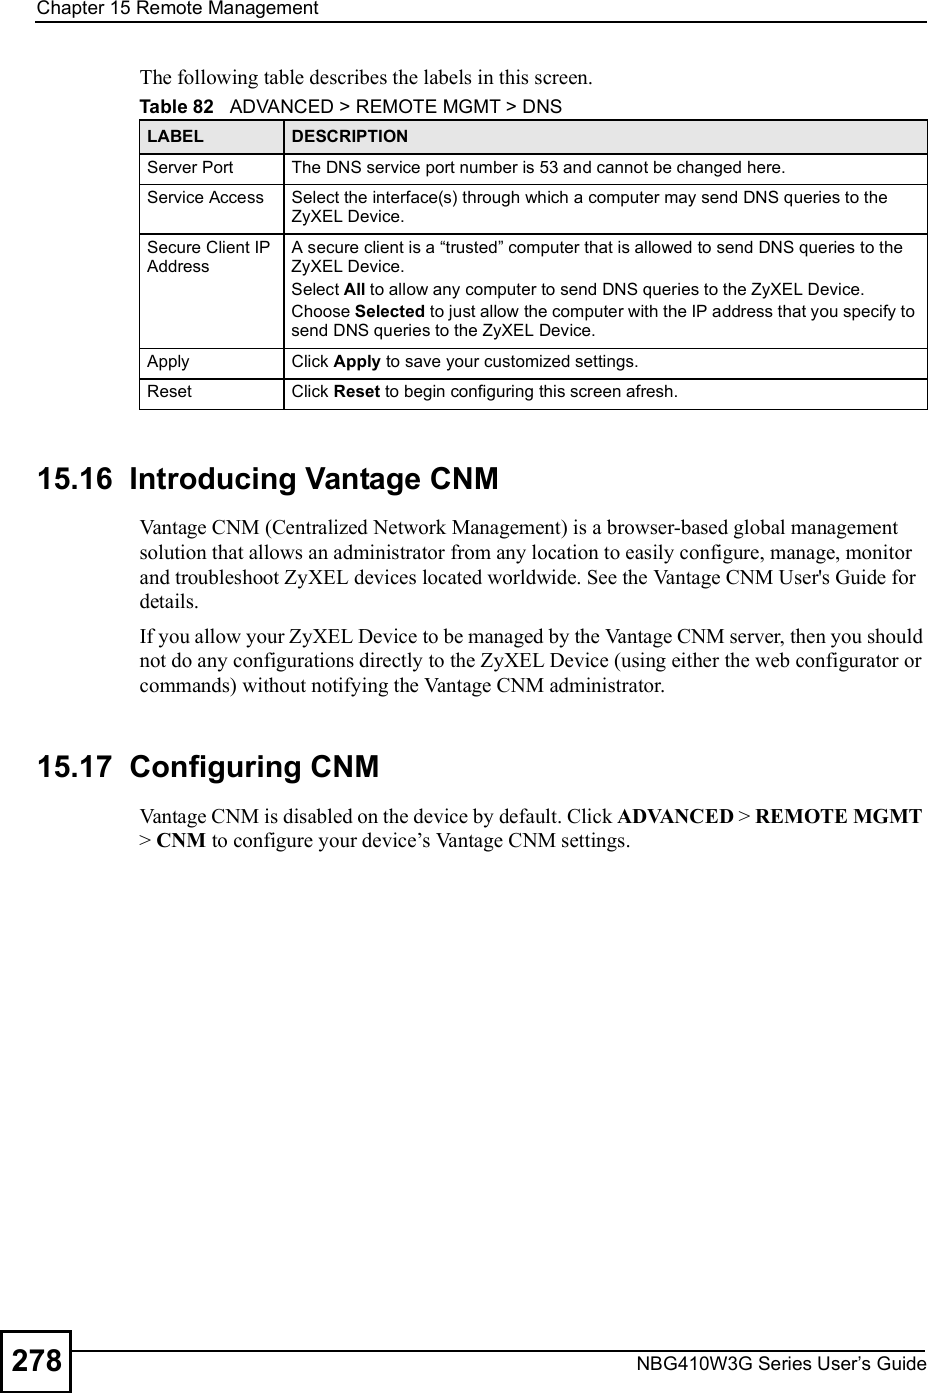 Chapter 15Remote ManagementNBG410W3G Series User s Guide278The following table describes the labels in this screen. 15.16  Introducing Vantage CNM Vantage CNM (Centralized Network Management) is a browser-based global management solution that allows an administrator from any location to easily configure, manage, monitor and troubleshoot ZyXEL devices located worldwide. See the Vantage CNM User&apos;s Guide for details.If you allow your ZyXEL Device to be managed by the Vantage CNM server, then you should not do any configurations directly to the ZyXEL Device (using either the web configurator or commands) without notifying the Vantage CNM administrator.15.17  Configuring CNM Vantage CNM is disabled on the device by default. Click ADVANCED &gt; REMOTE MGMT &gt; CNM to configure your device!s Vantage CNM settings.Table 82   ADVANCED &gt; REMOTE MGMT &gt; DNSLABEL DESCRIPTIONServer Port The DNS service port number is 53 and cannot be changed here.Service Access Select the interface(s) through which a computer may send DNS queries to the ZyXEL Device.Secure Client IP AddressA secure client is a &quot;trusted# computer that is allowed to send DNS queries to the ZyXEL Device.Select All to allow any computer to send DNS queries to the ZyXEL Device.Choose Selected to just allow the computer with the IP address that you specify to send DNS queries to the ZyXEL Device.Apply Click Apply to save your customized settings.Reset Click Reset to begin configuring this screen afresh.